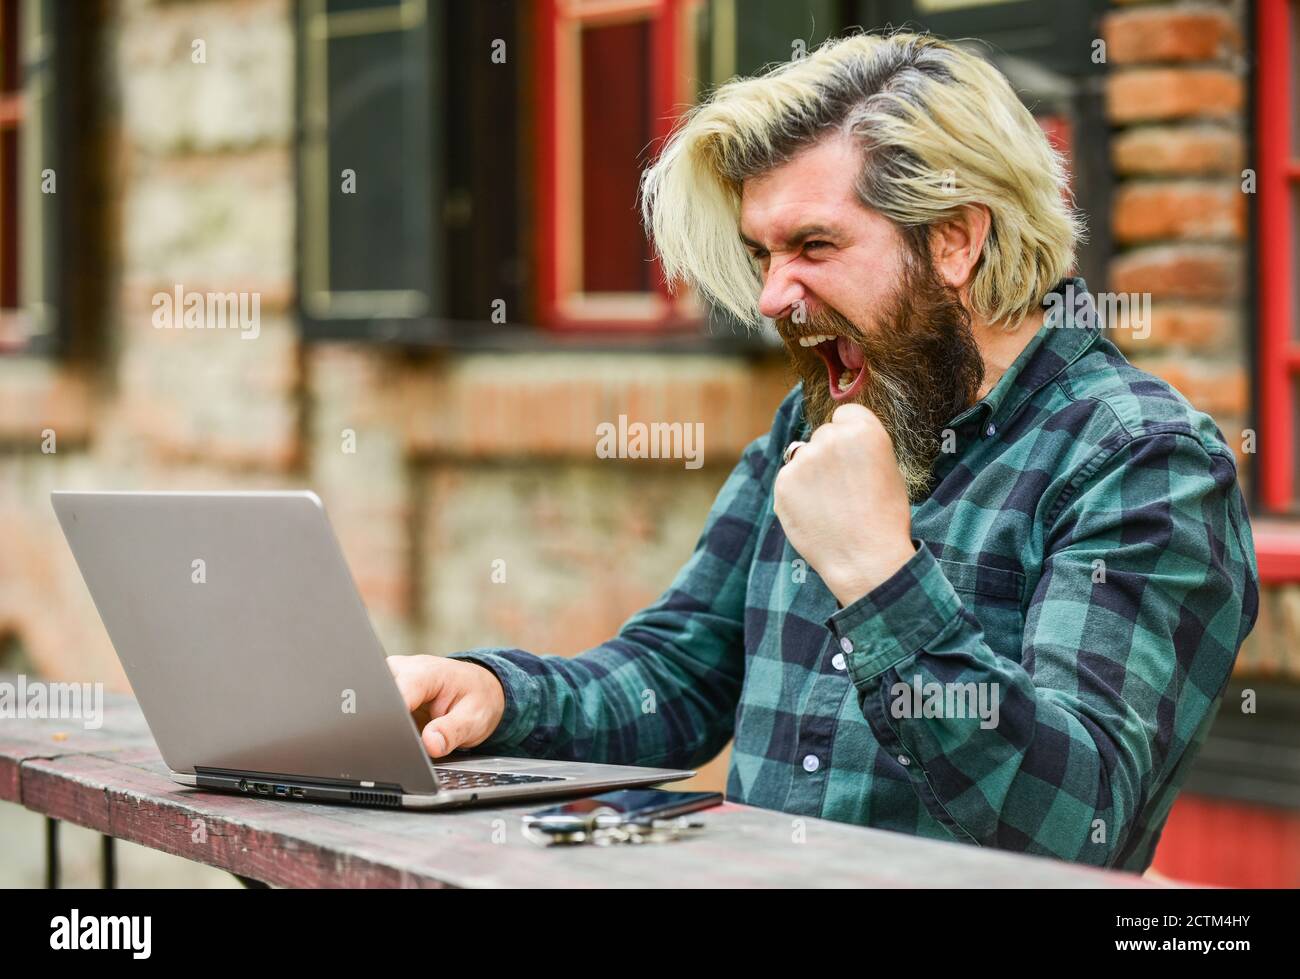 Modern communication. Risky shopping. Stock trader. Online business. Online entrepreneur working outdoors. Man busy work with laptop. Businessman laptop terrace. Online education. Surfing internet. Stock Photo